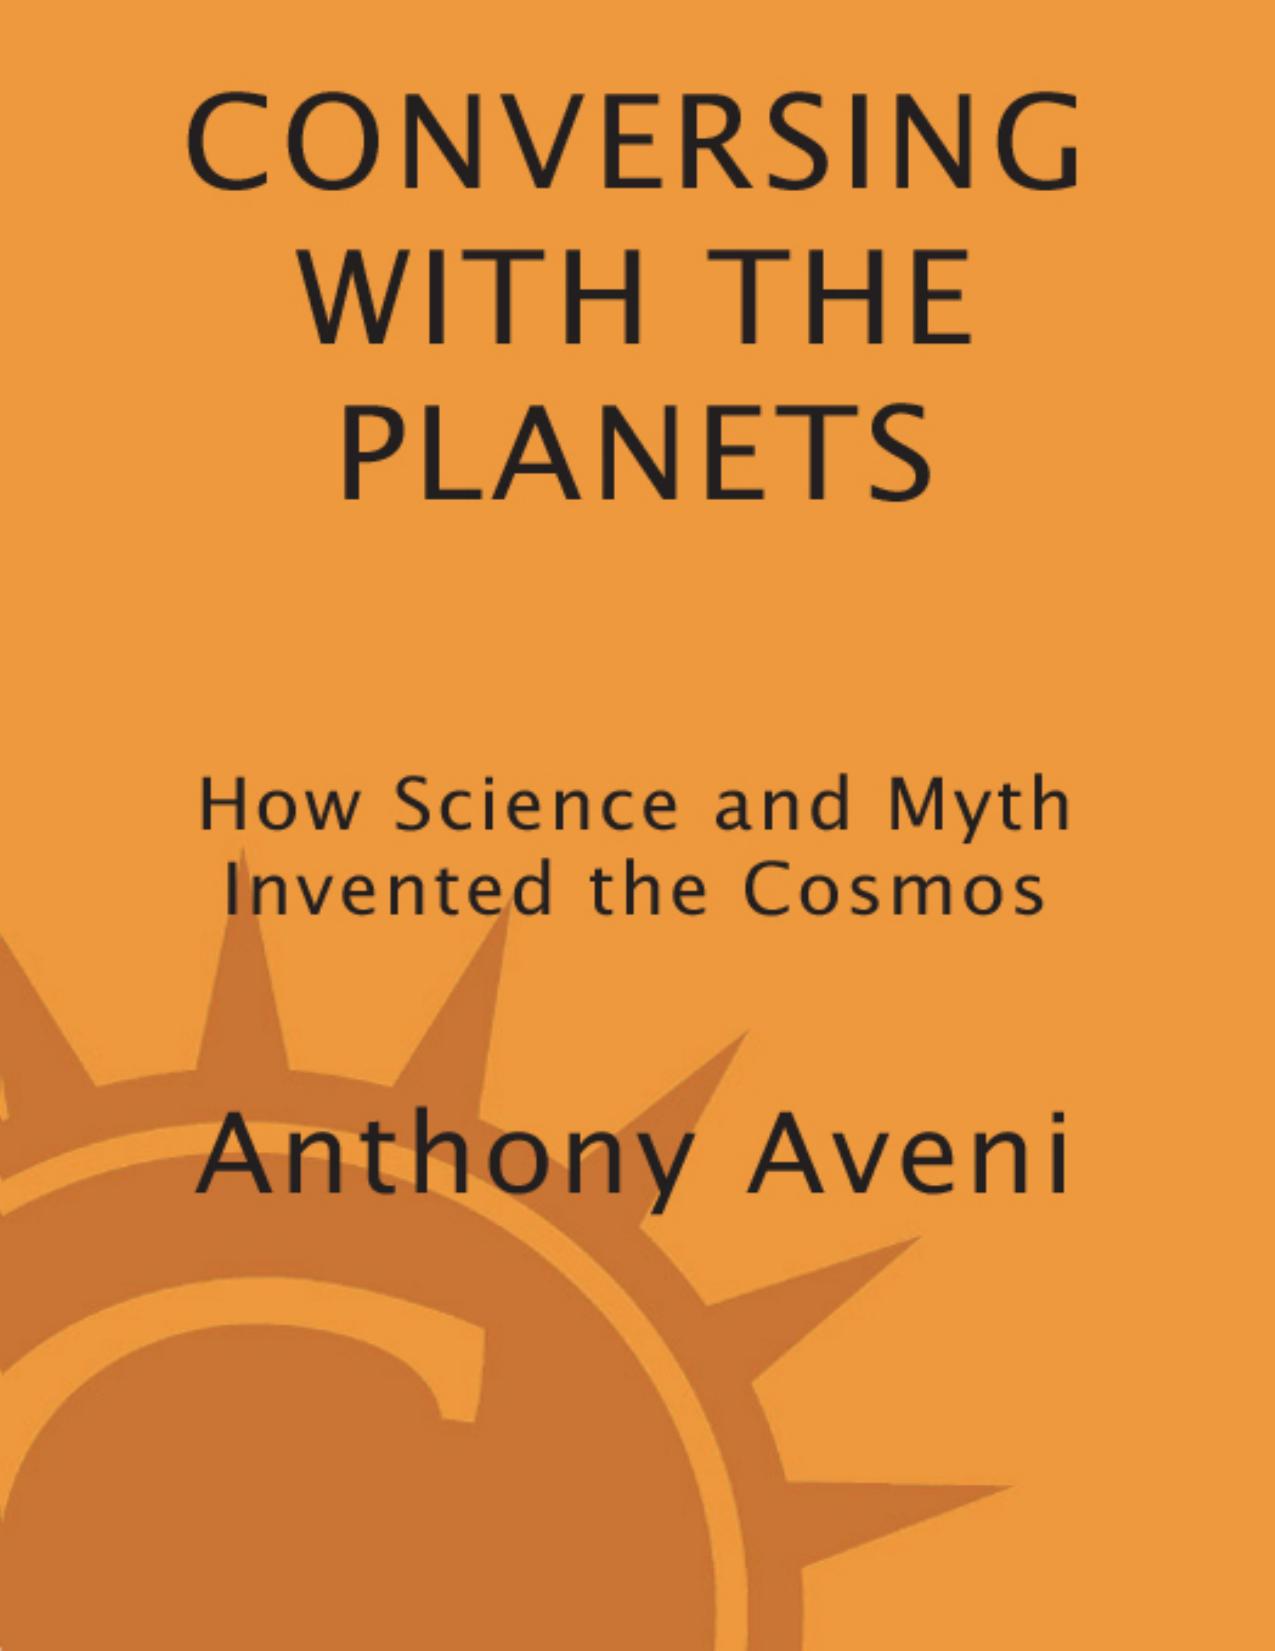 Conversing with the Planets